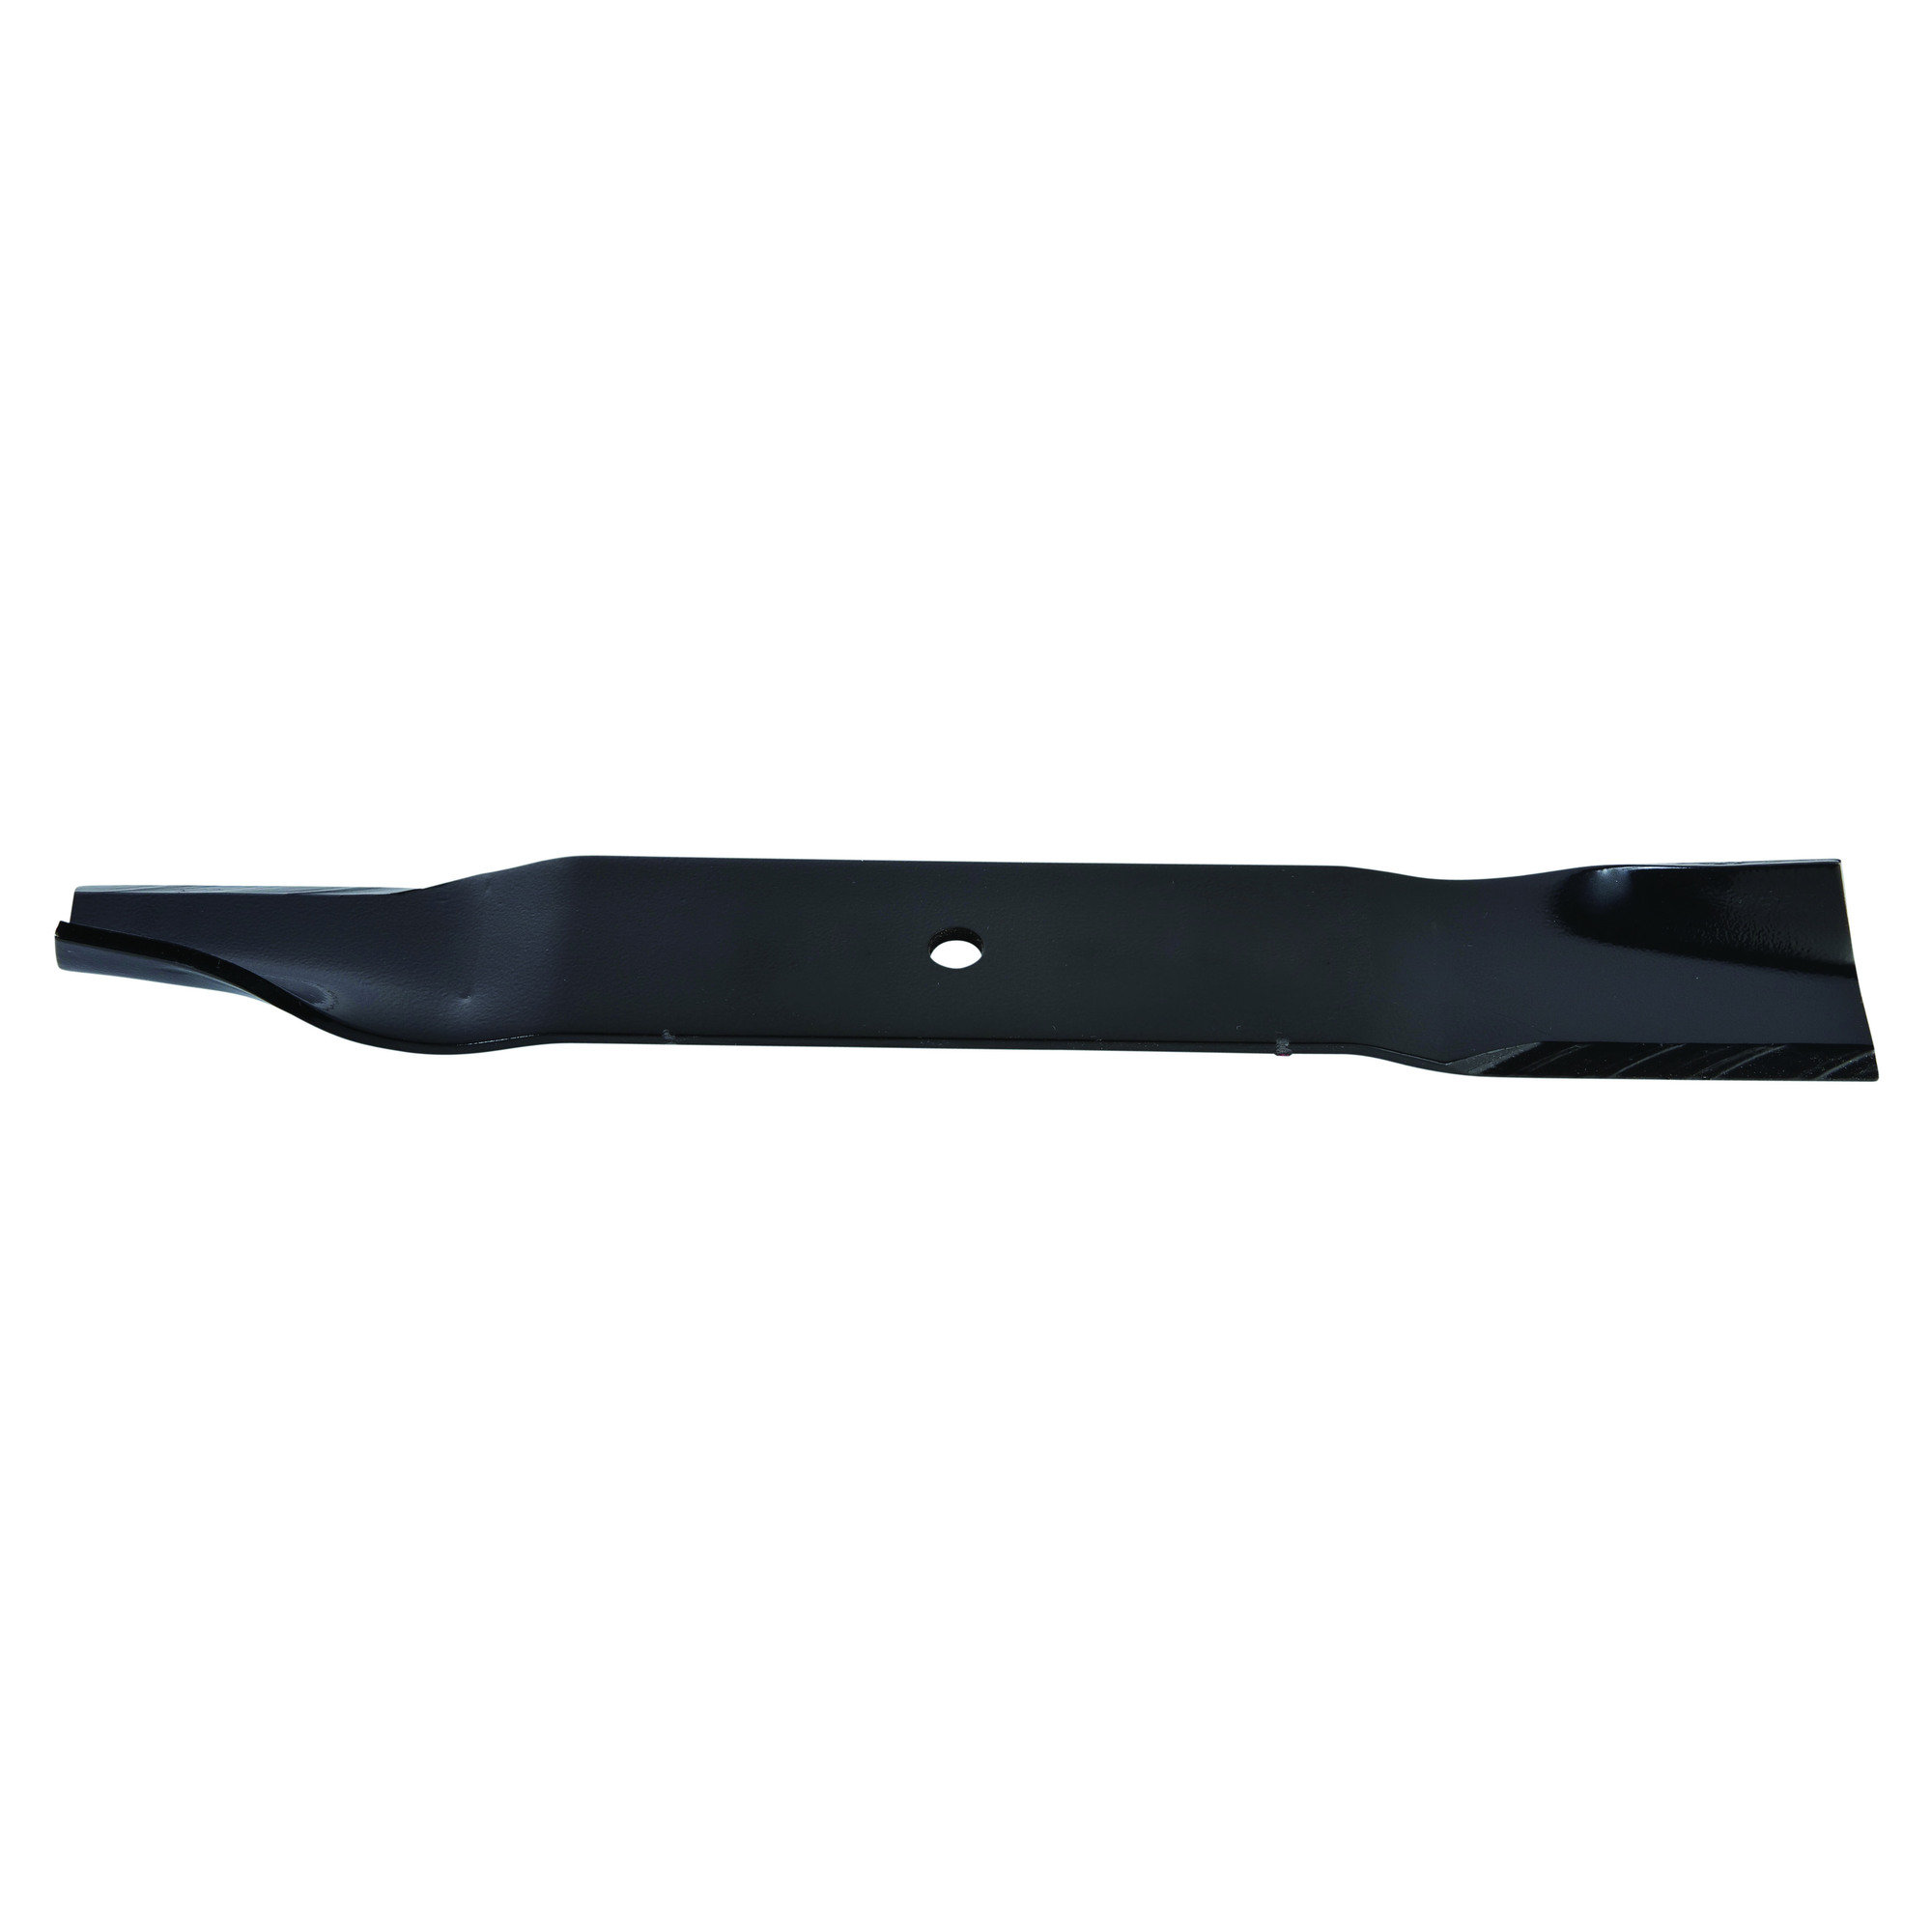 Oregon, Replacement Lawn Mower Blade, Length 16.94 in, Model 92-160